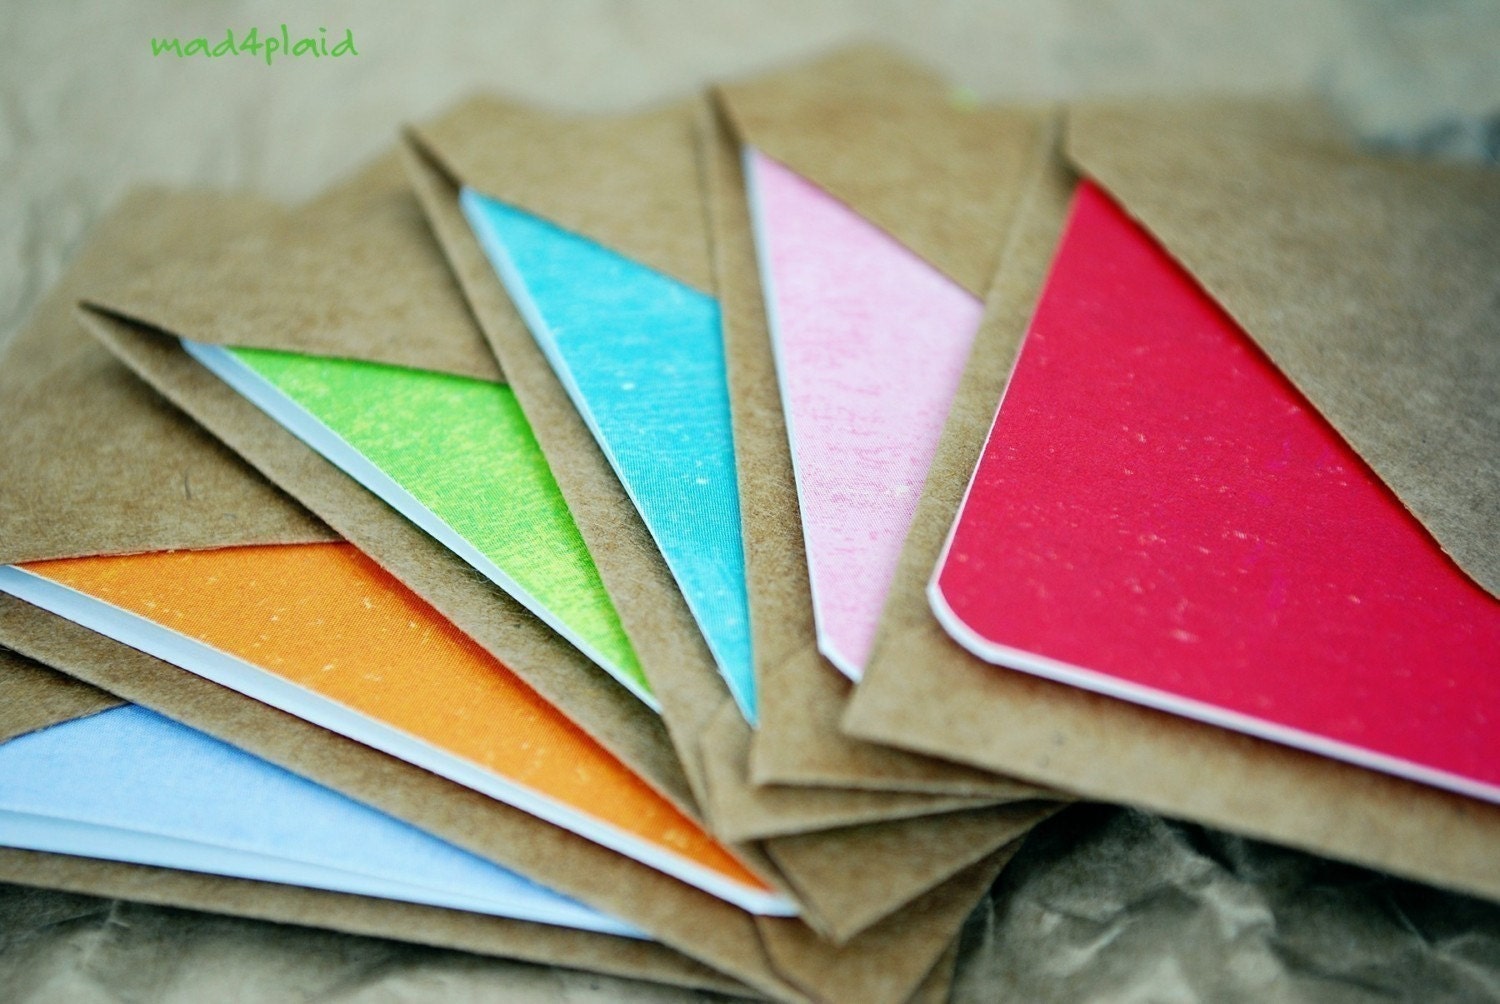 Blank Mini Card Set of 6, Spring Brights with Natural Kraft Envelopes, Handmade Paper Goods by mad4plaid on Etsy